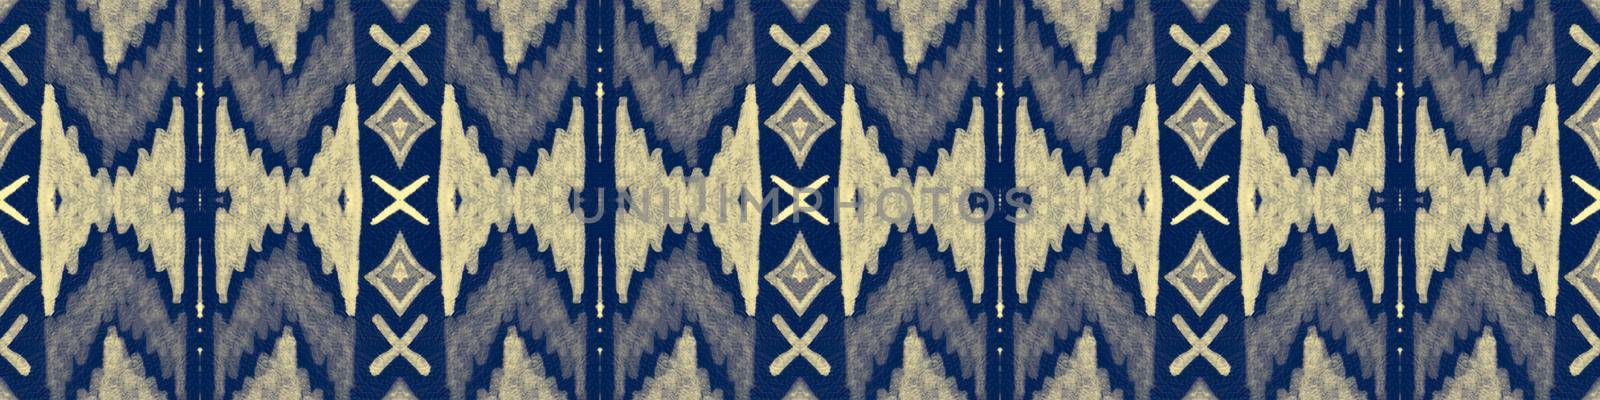 American native ornament. Seamless aztec pattern. Grunge indian print. American native background. Abstract ethnic design for fabric. Peru motif texture. American native ornament.